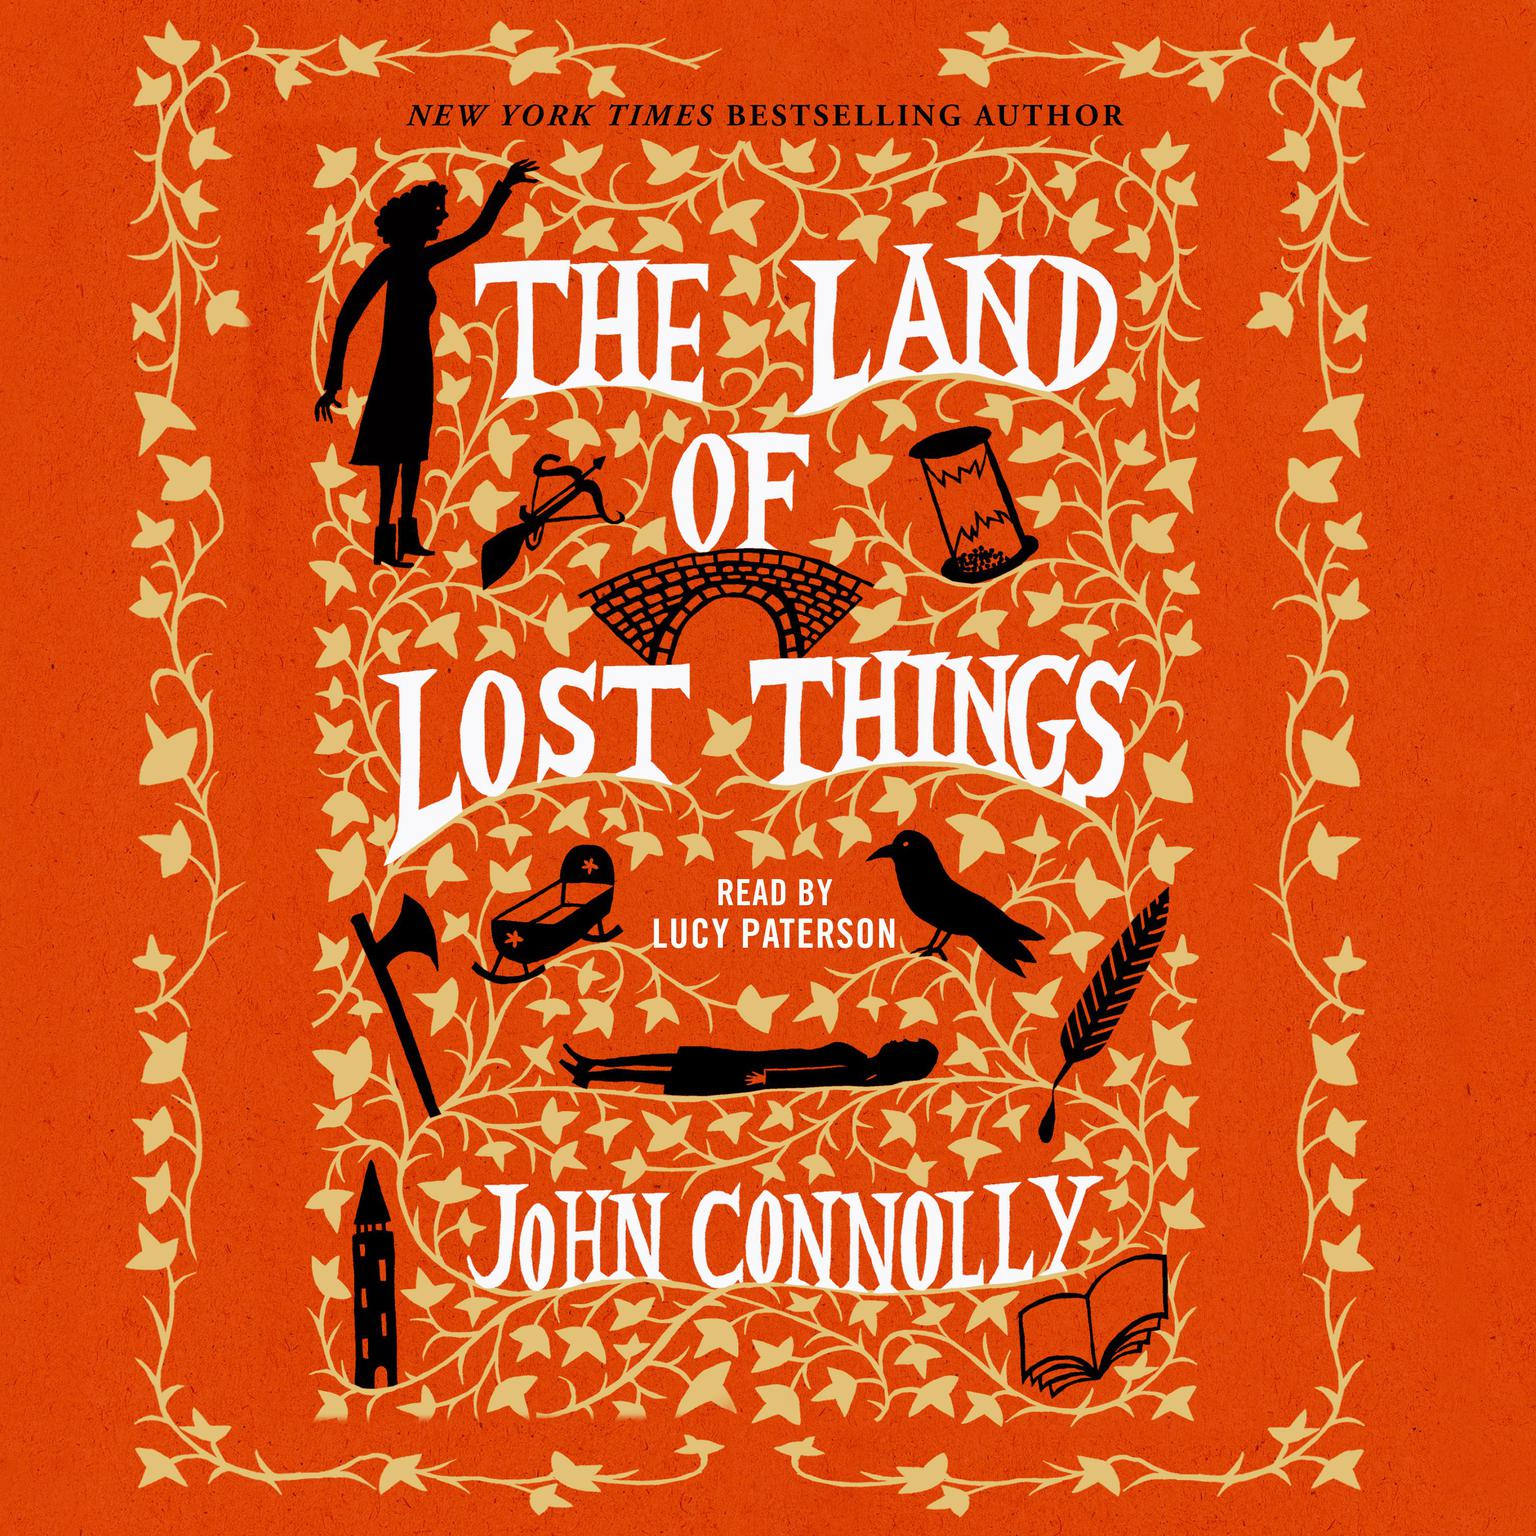 The Land of Lost Things Audiobook, by John Connolly